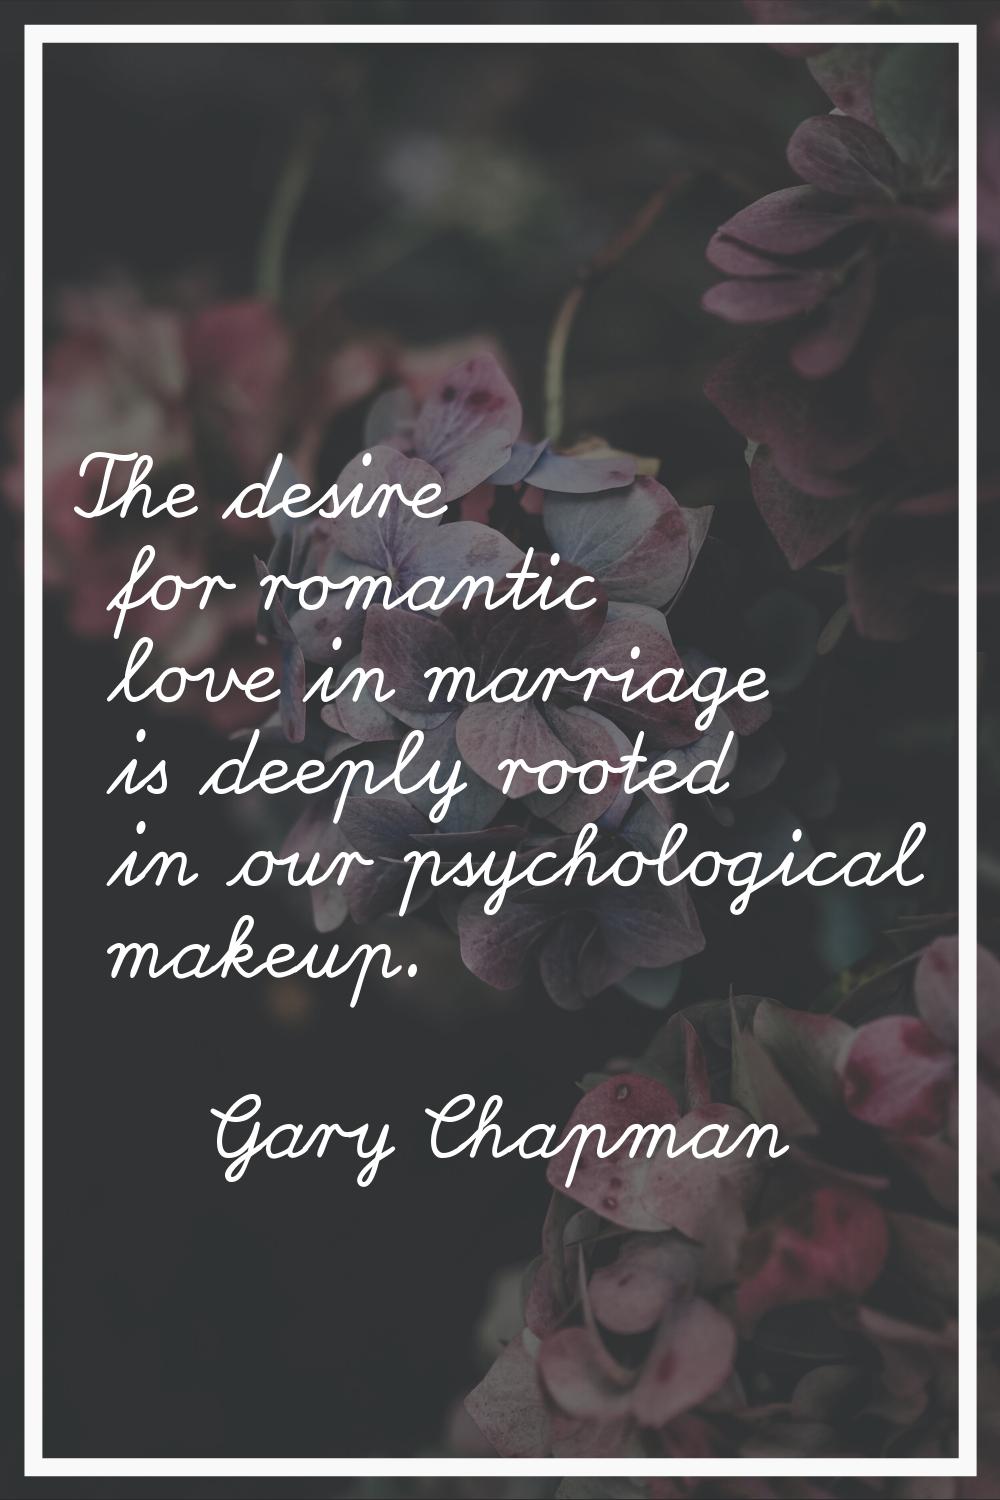 The desire for romantic love in marriage is deeply rooted in our psychological makeup.